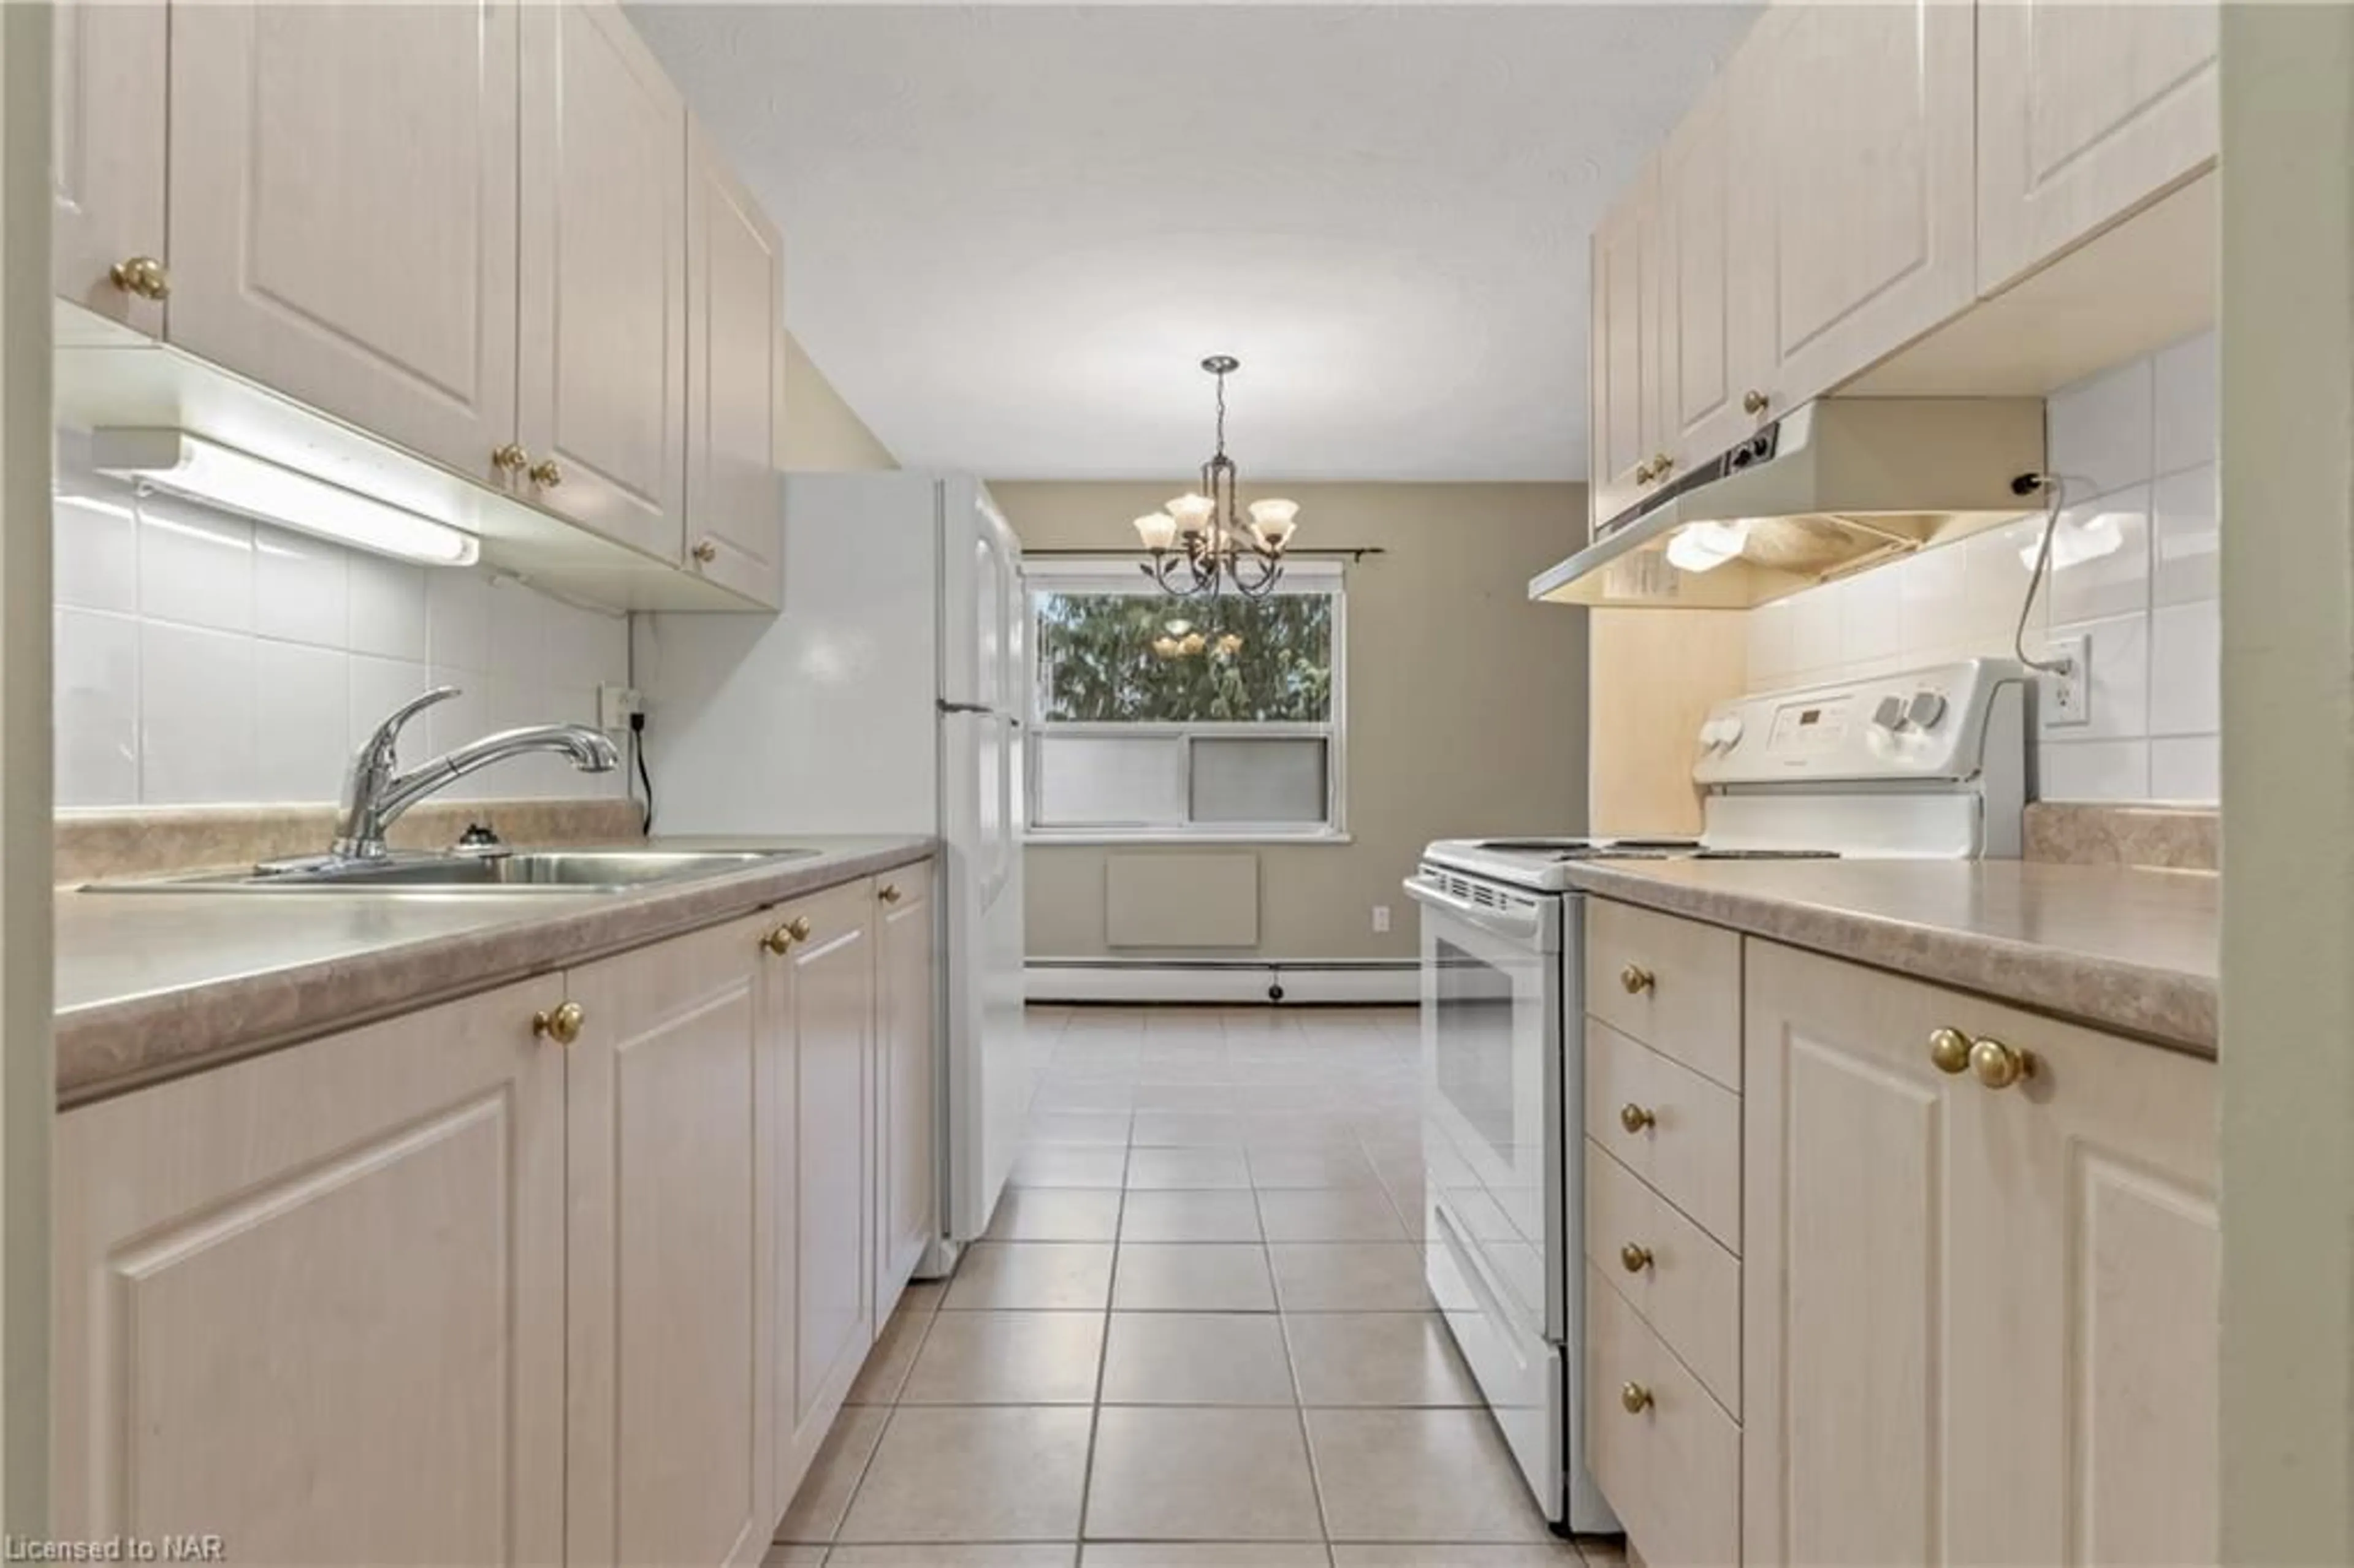 Standard kitchen for 485 Thorold Rd #110, Welland Ontario L3C 3X1